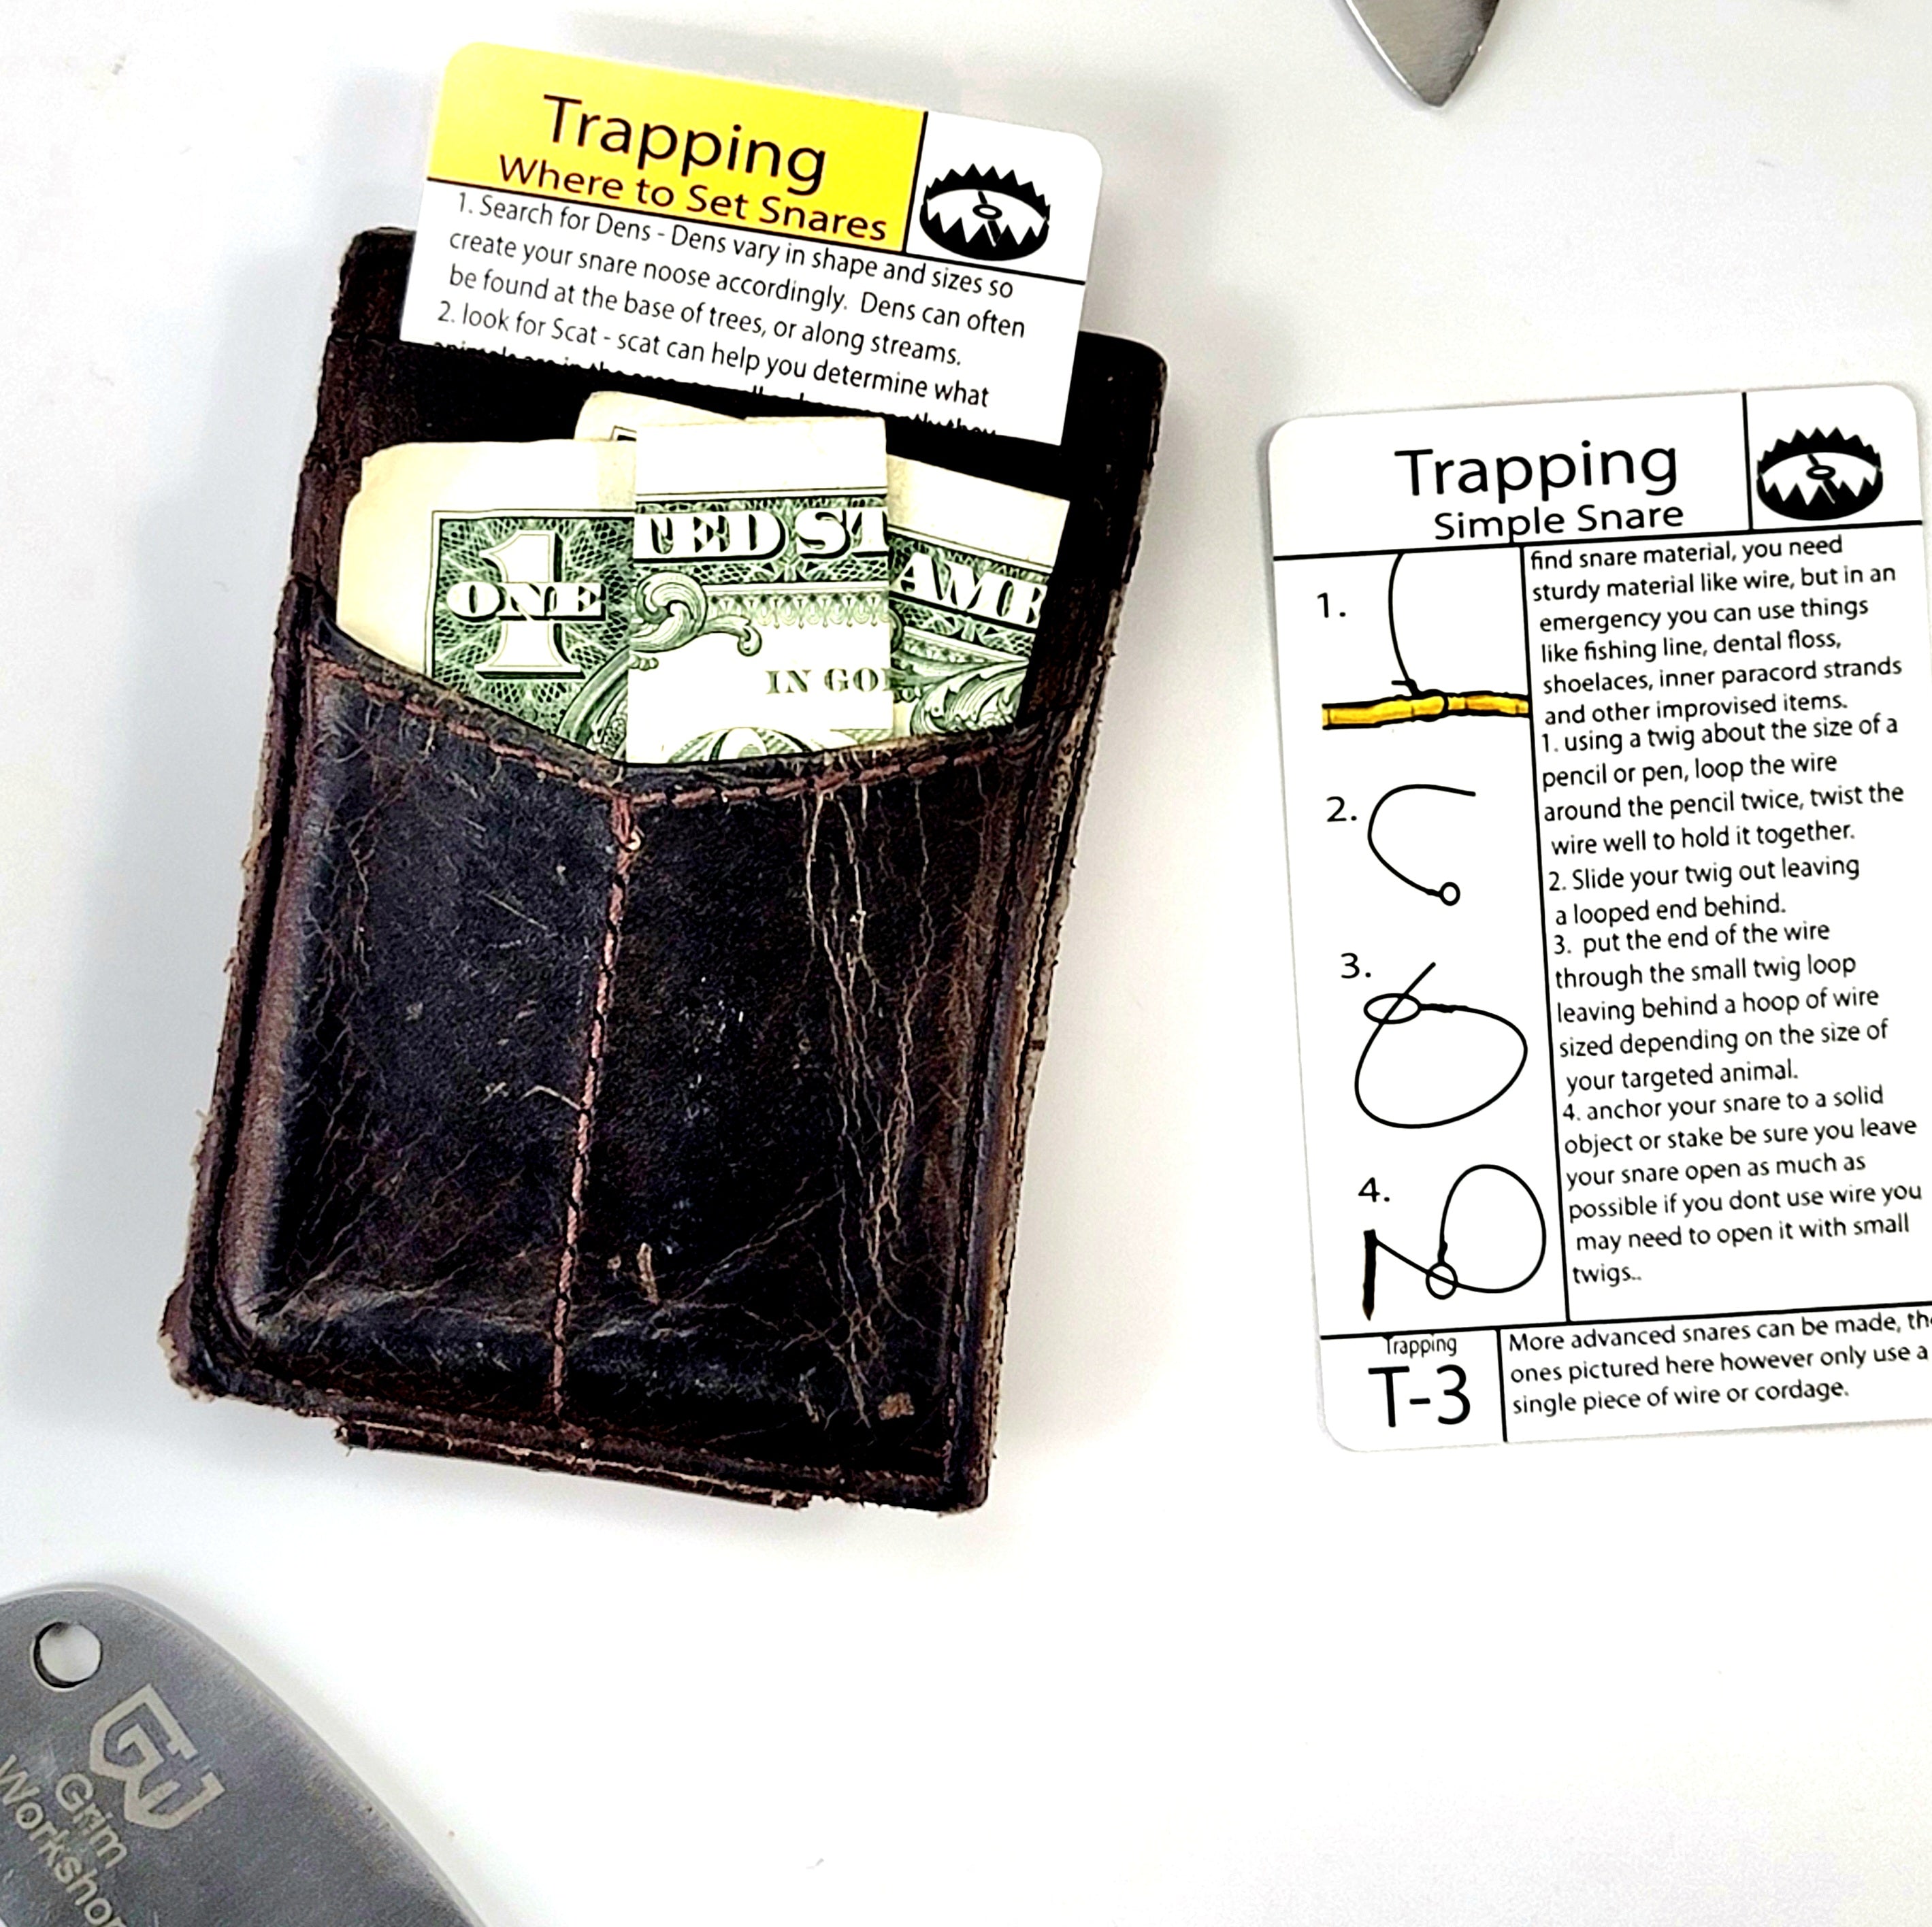 How to Make Animal Snare Traps Tip Card : How to Make DIY Trapping Snares including snare trapping placement suggestions